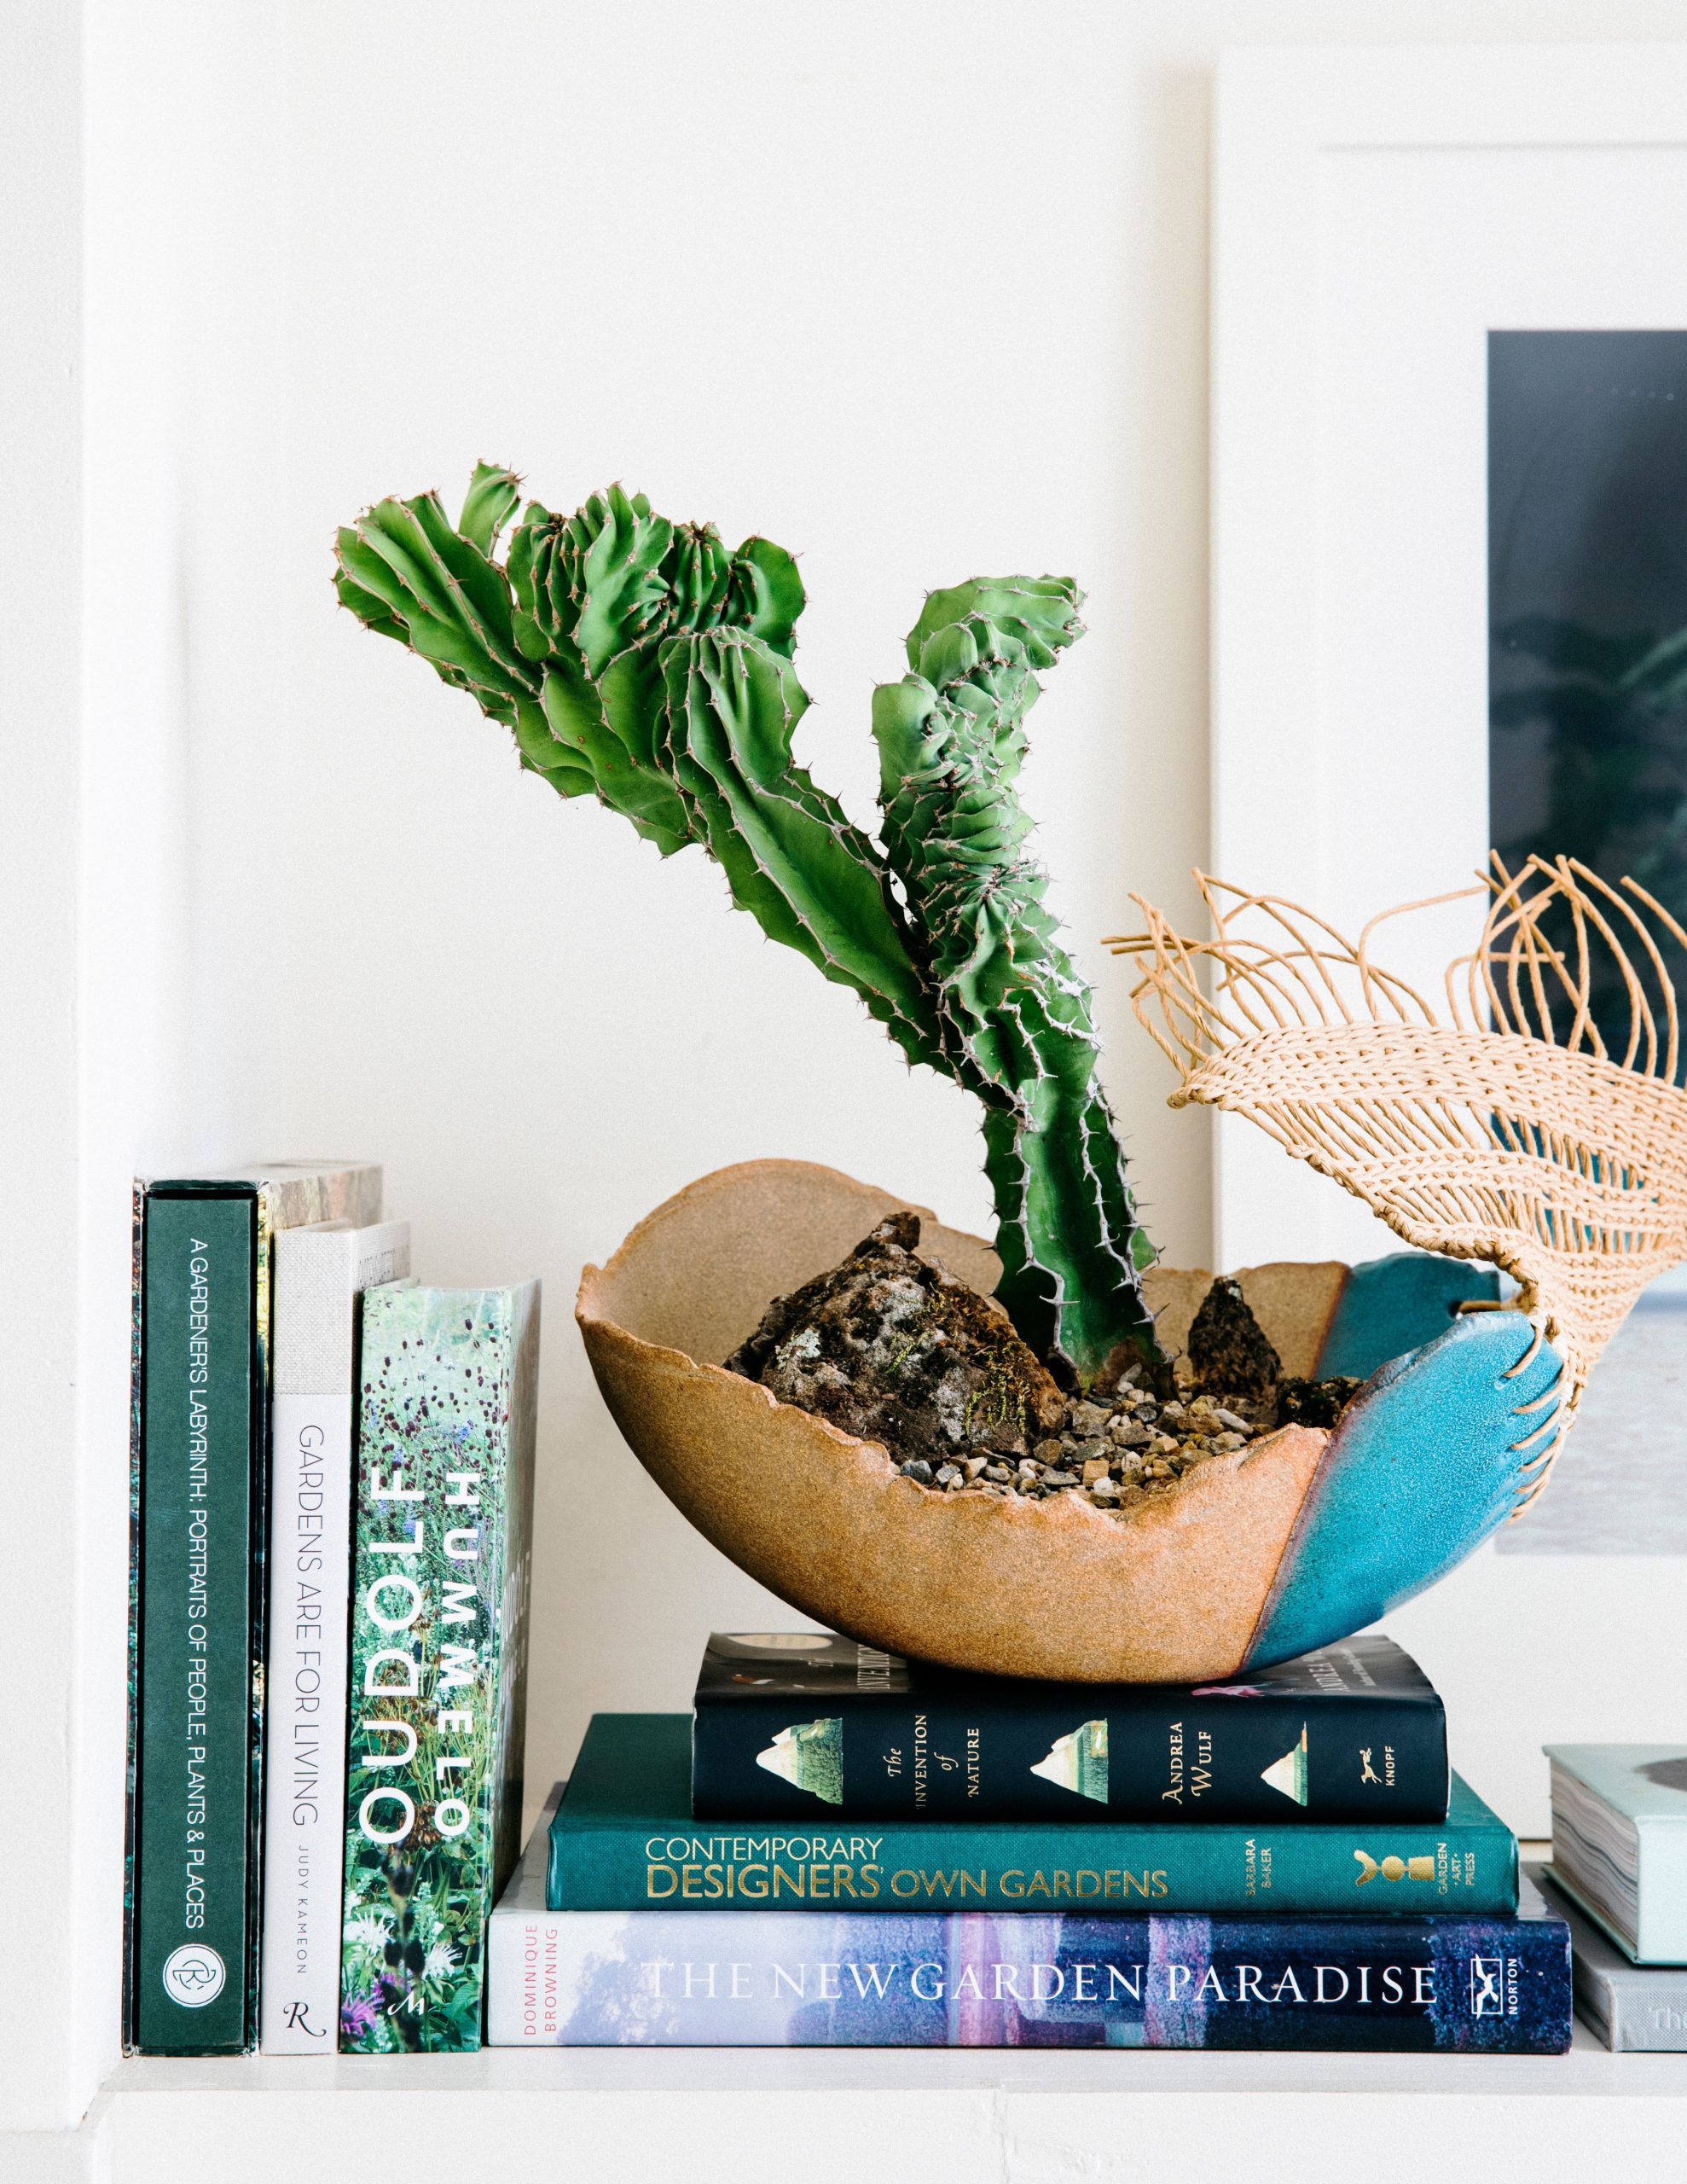 Plant Parenthood: Choosing And Caring For Indoor Greenery